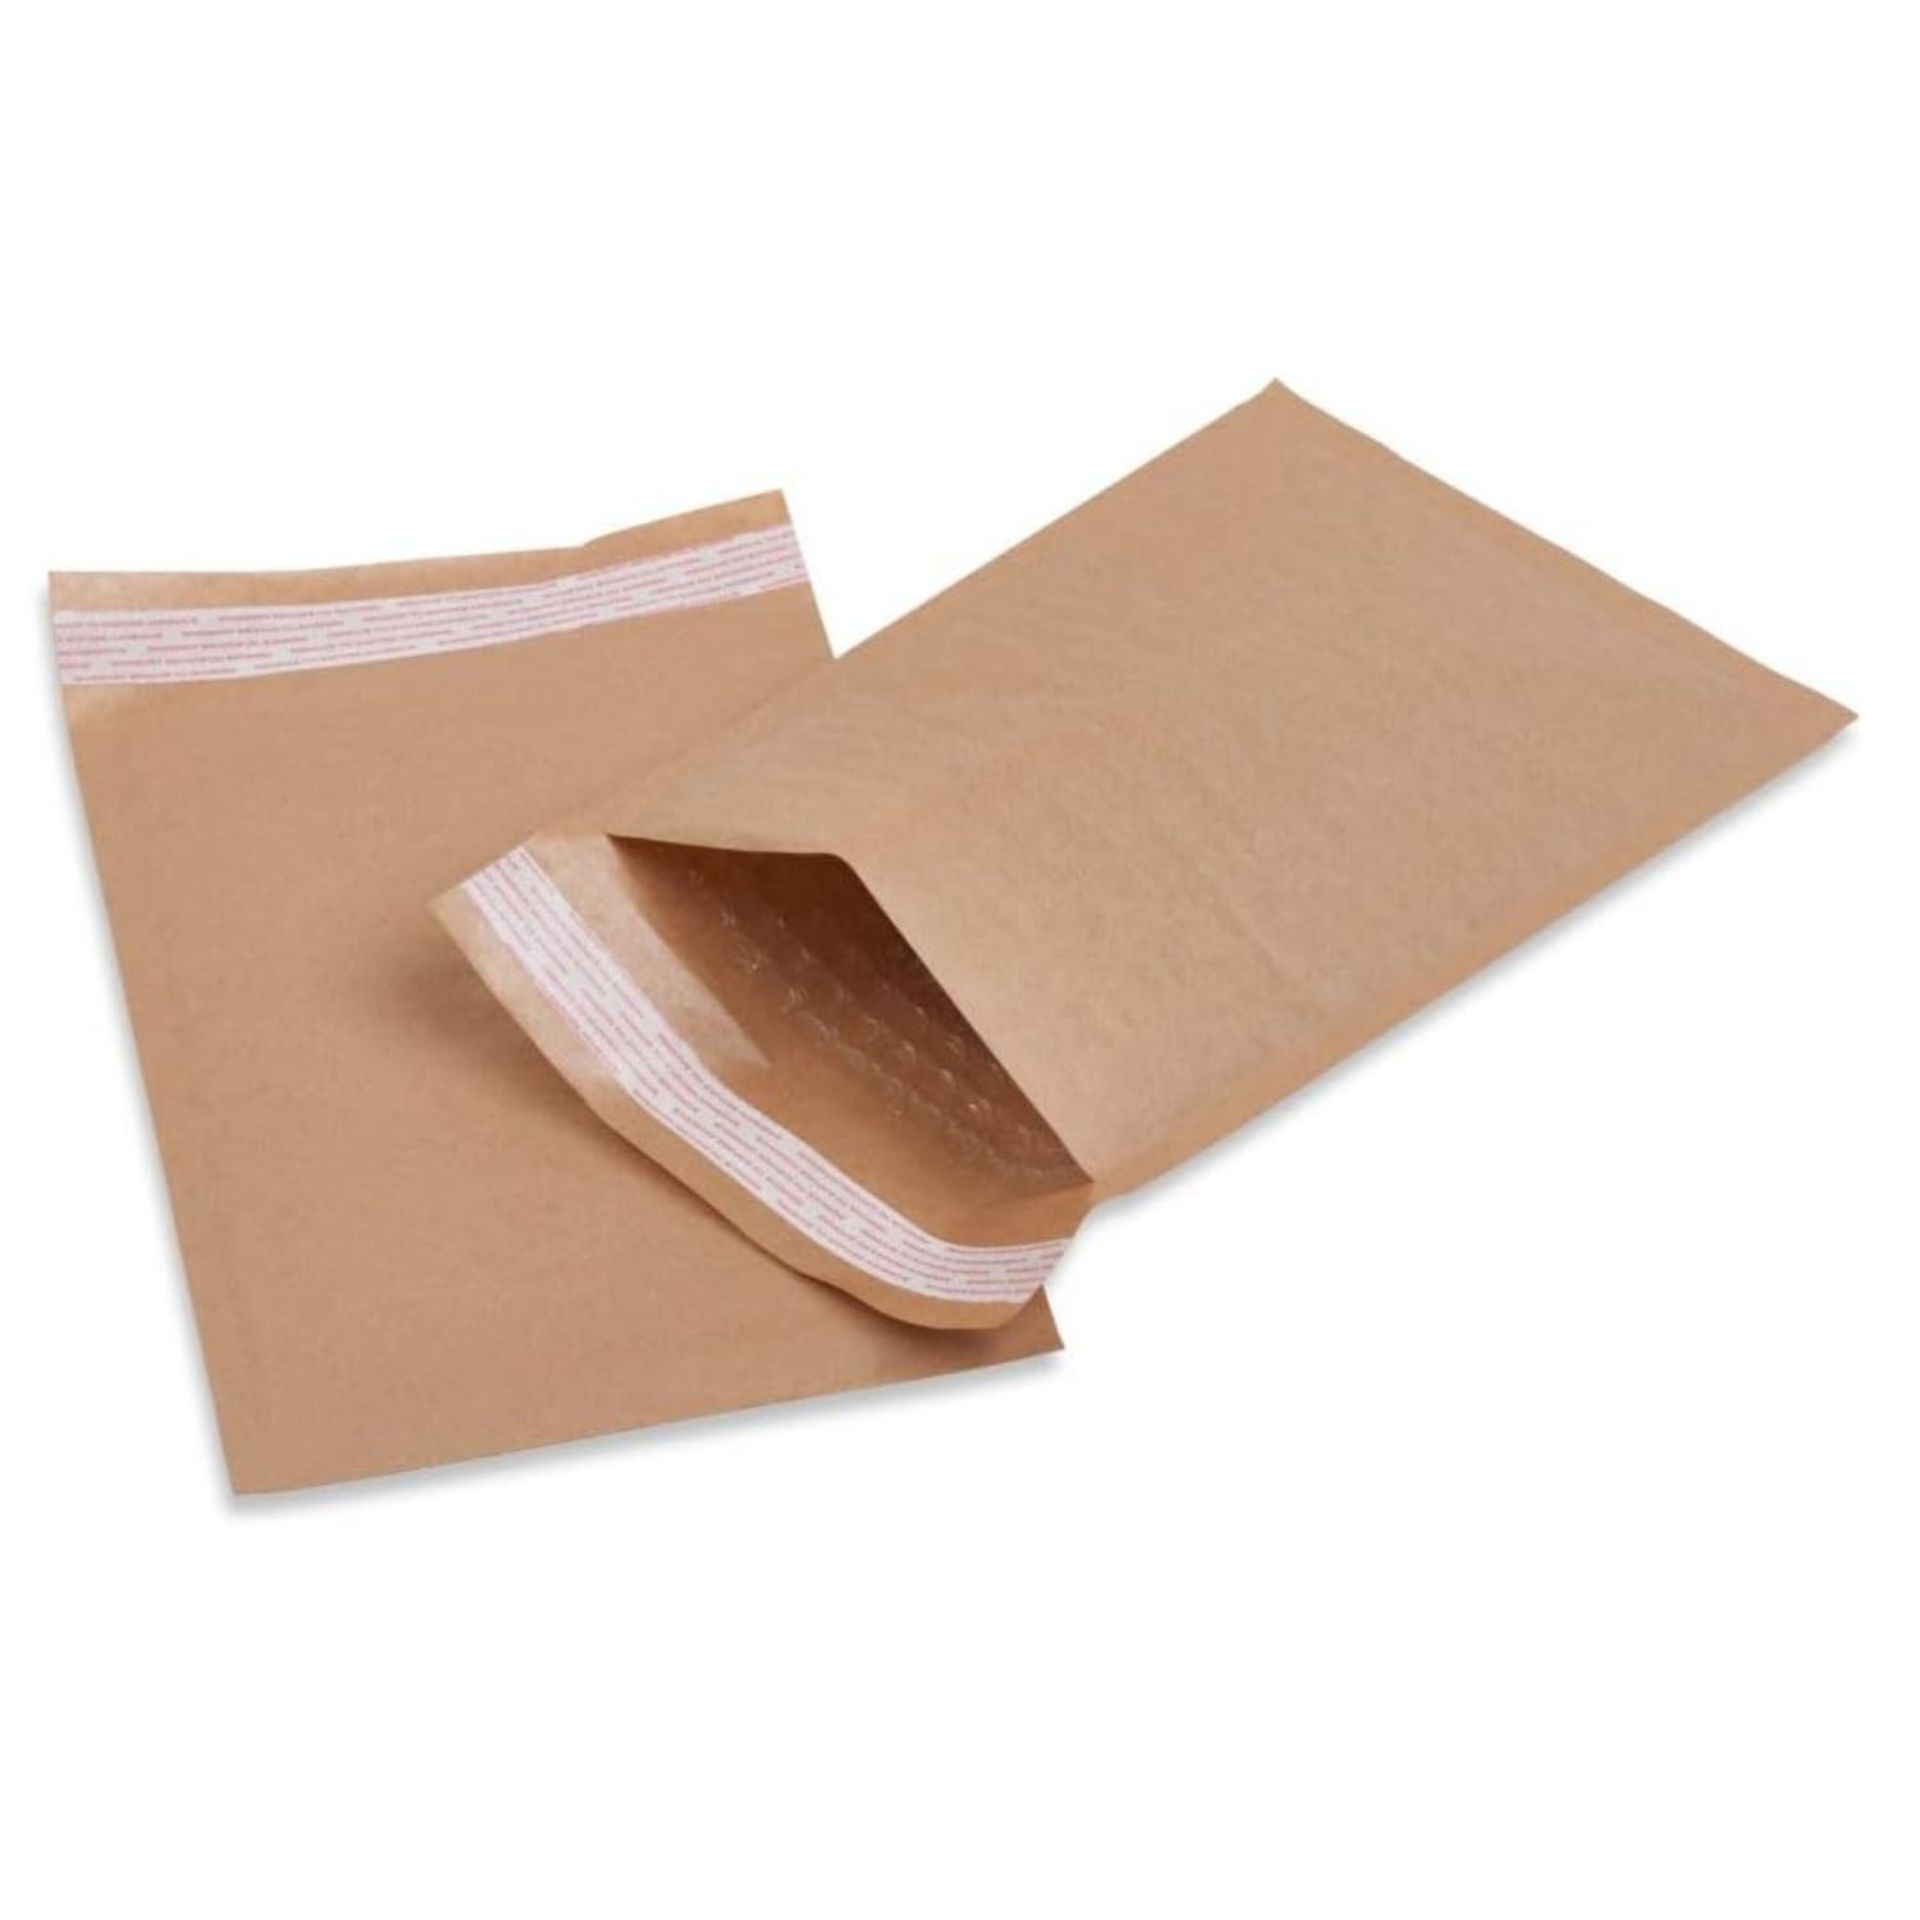 1000 BUBBLE ENVELOPES WITH PEEL AND SEAL TOUGH LIGHT PADDED (120 X 165MM) - Image 3 of 4